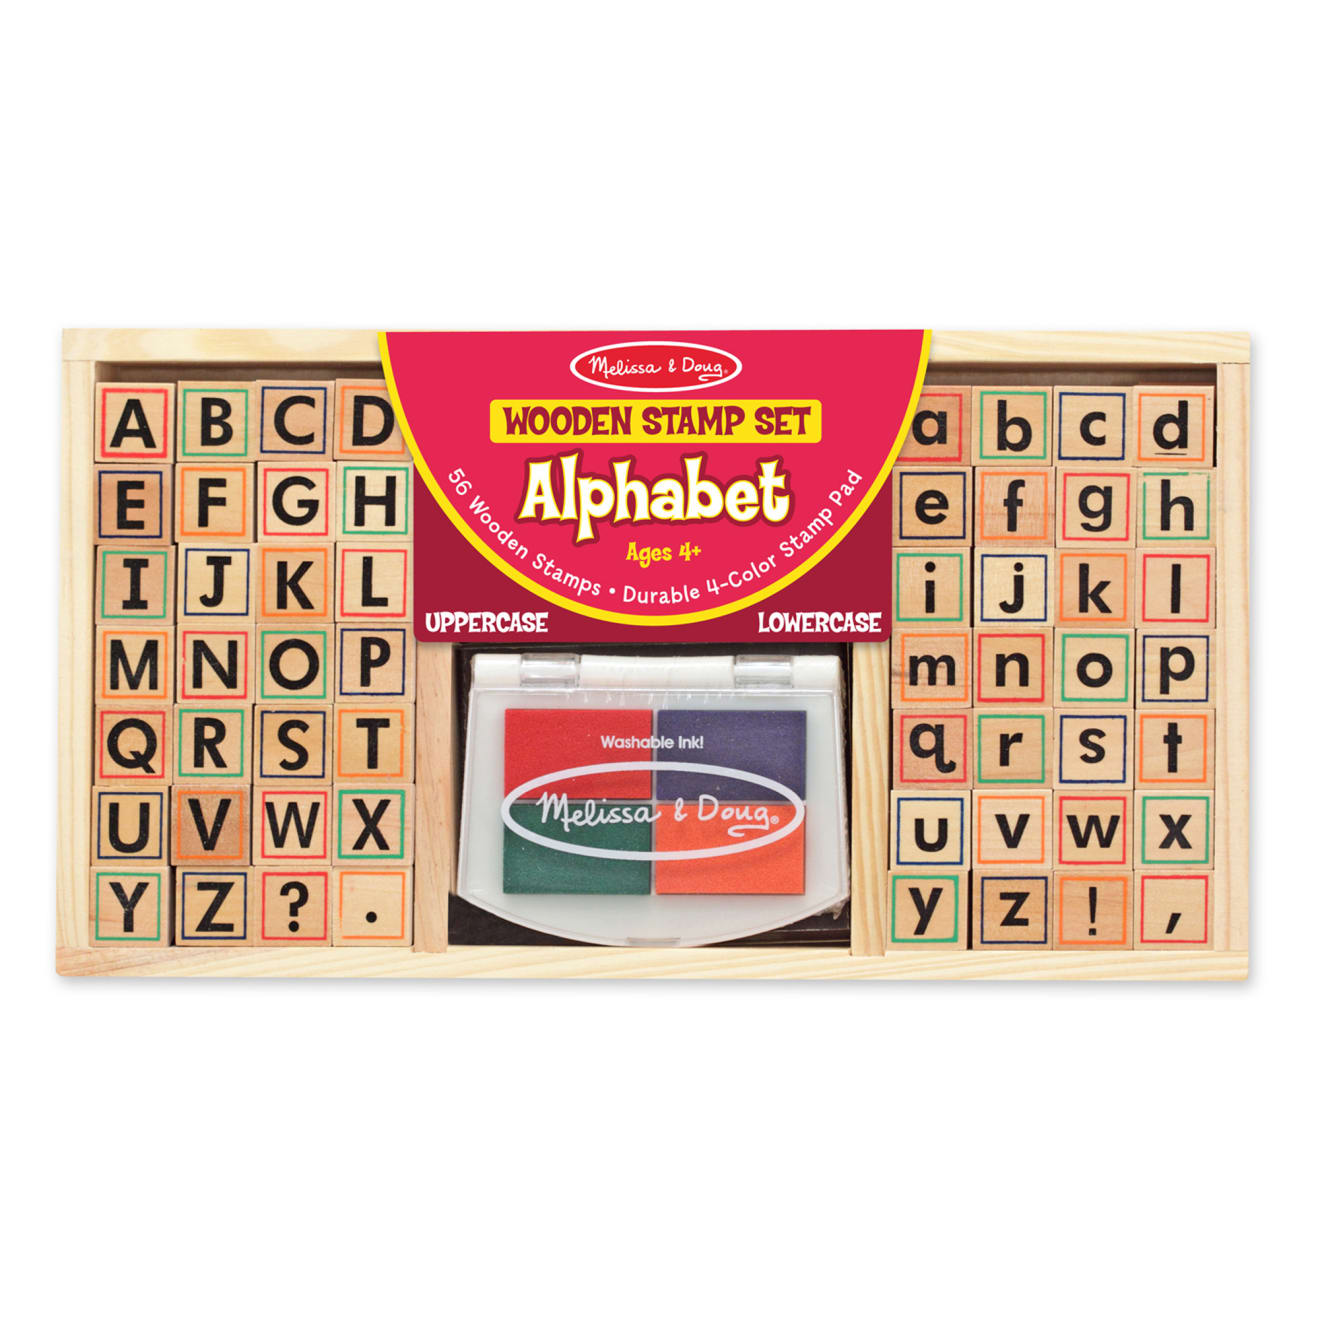 Glitter Upper Case Aplhabet Letters Stickers, 1-inch, 26-count 